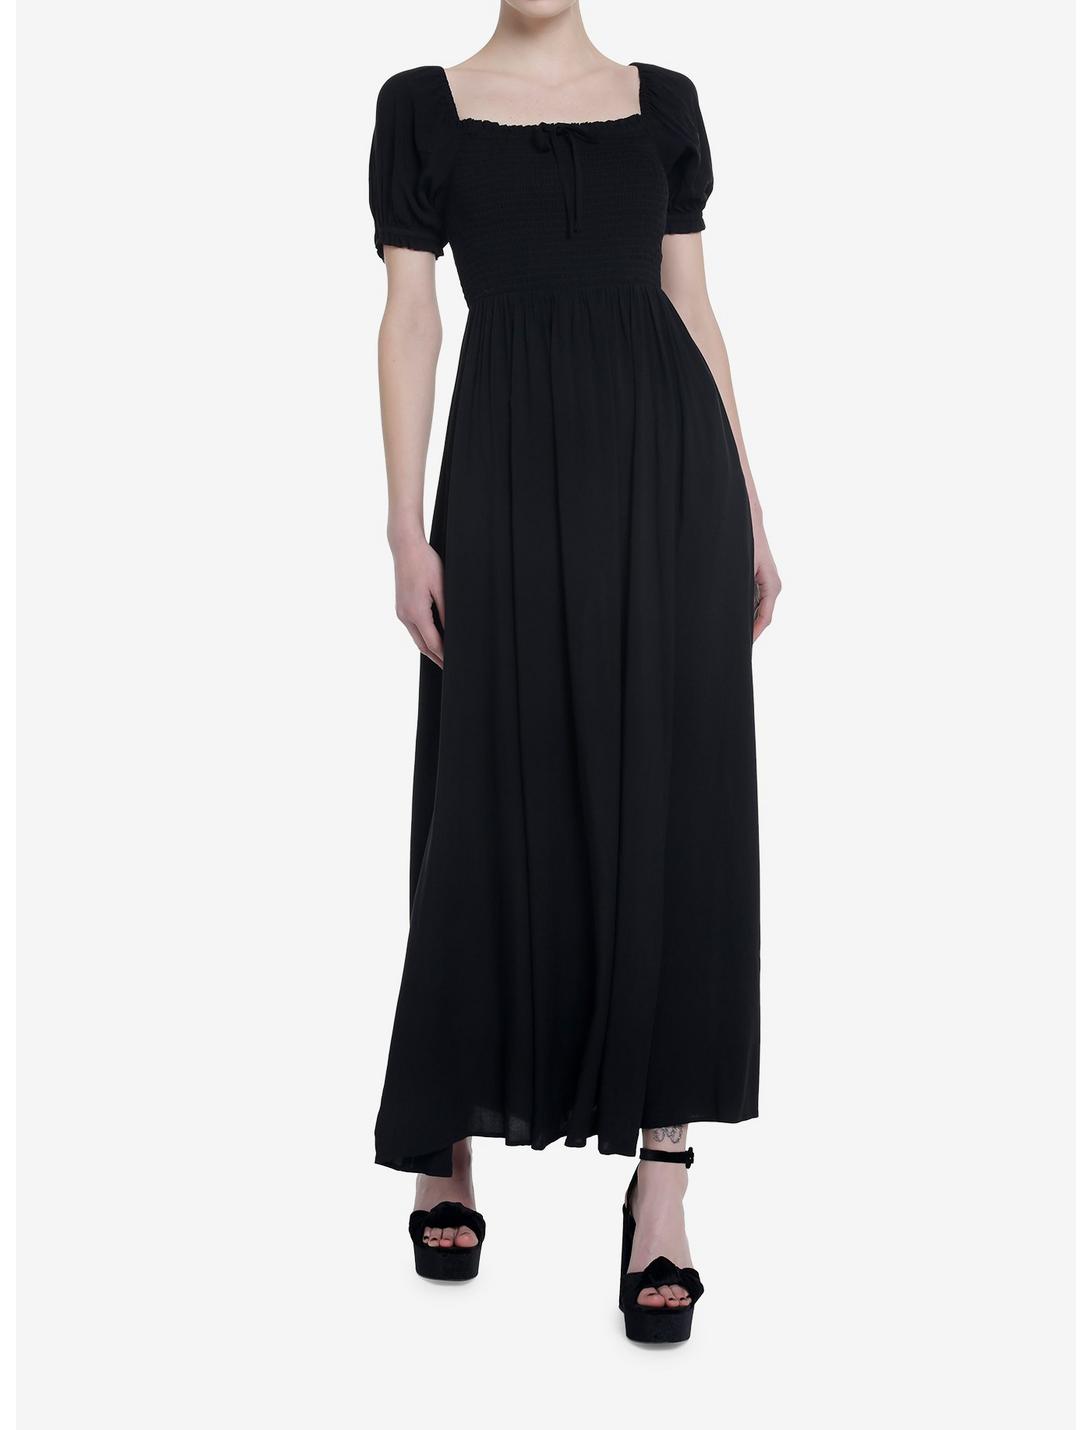 Thorn & Fable Black Smock Puff Sleeve Maxi Dress, BLACK, hi-res